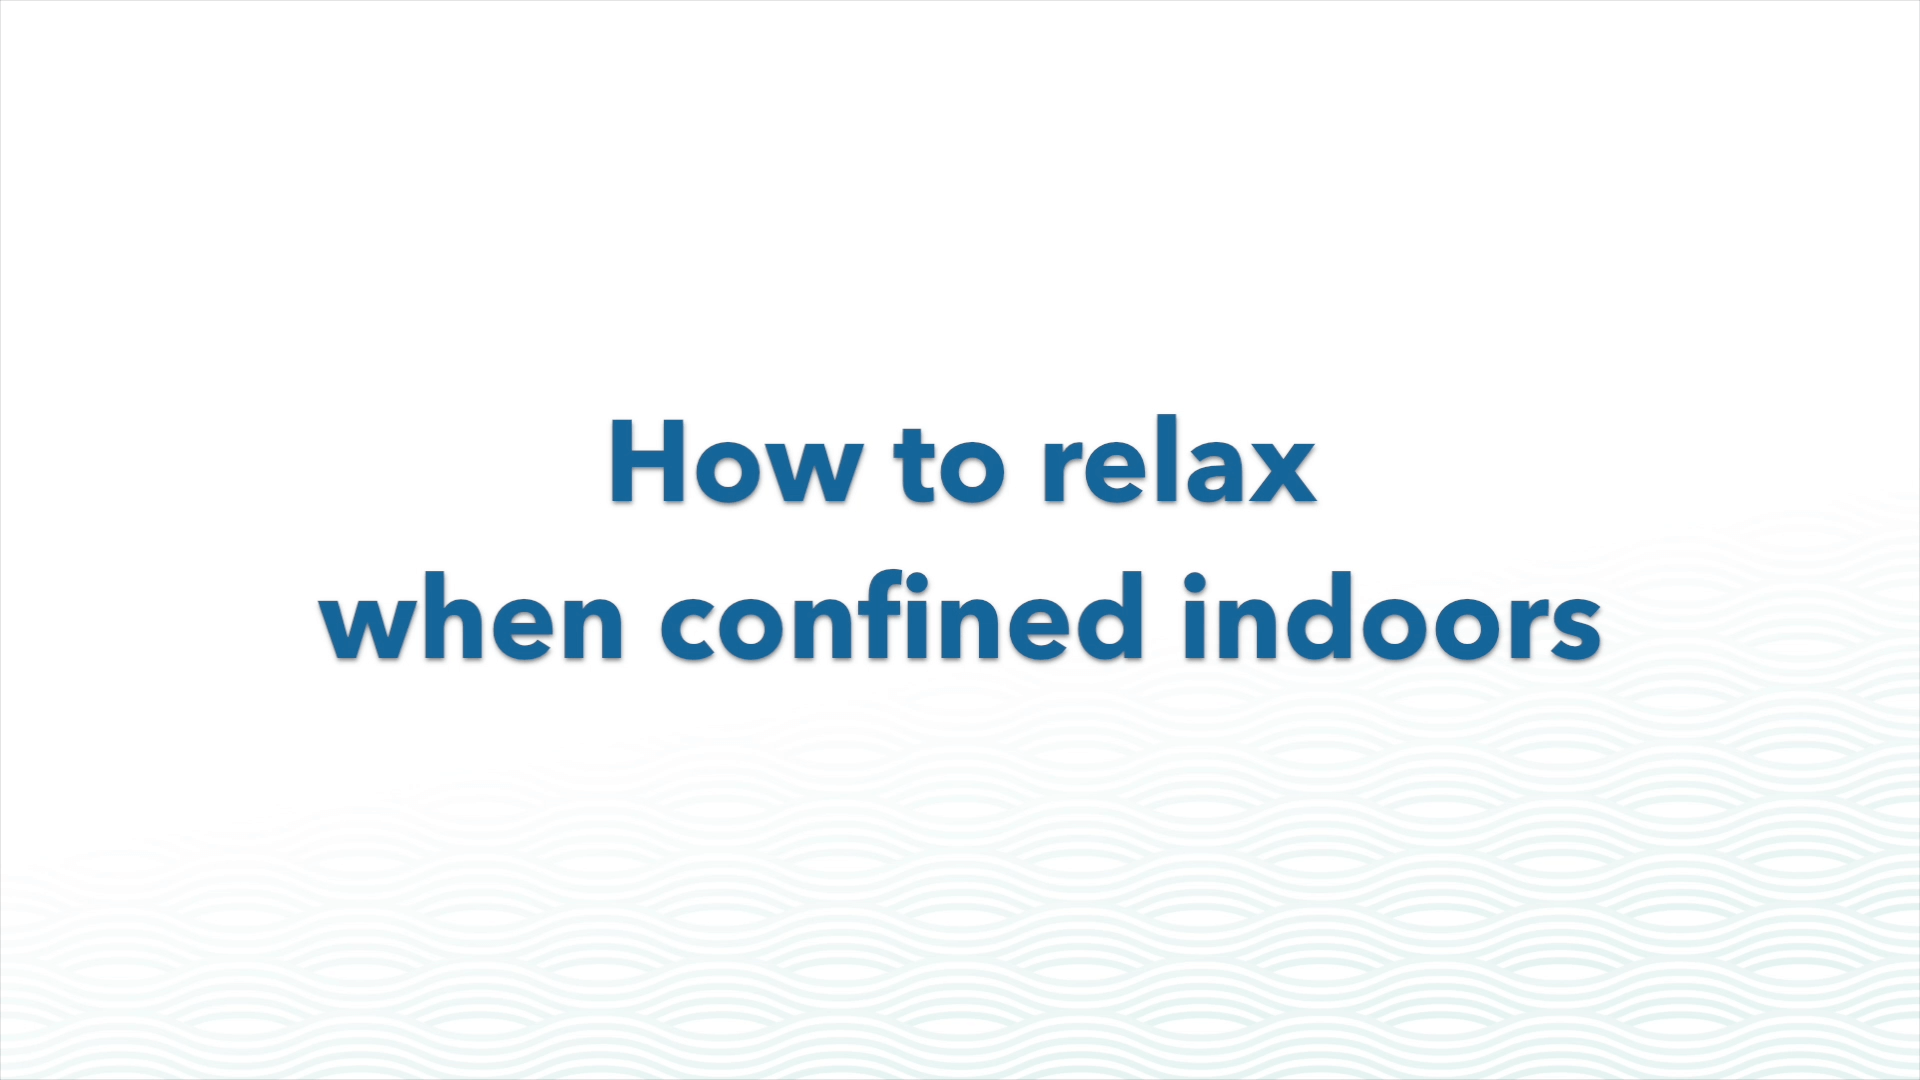 How to relax when confined indoors